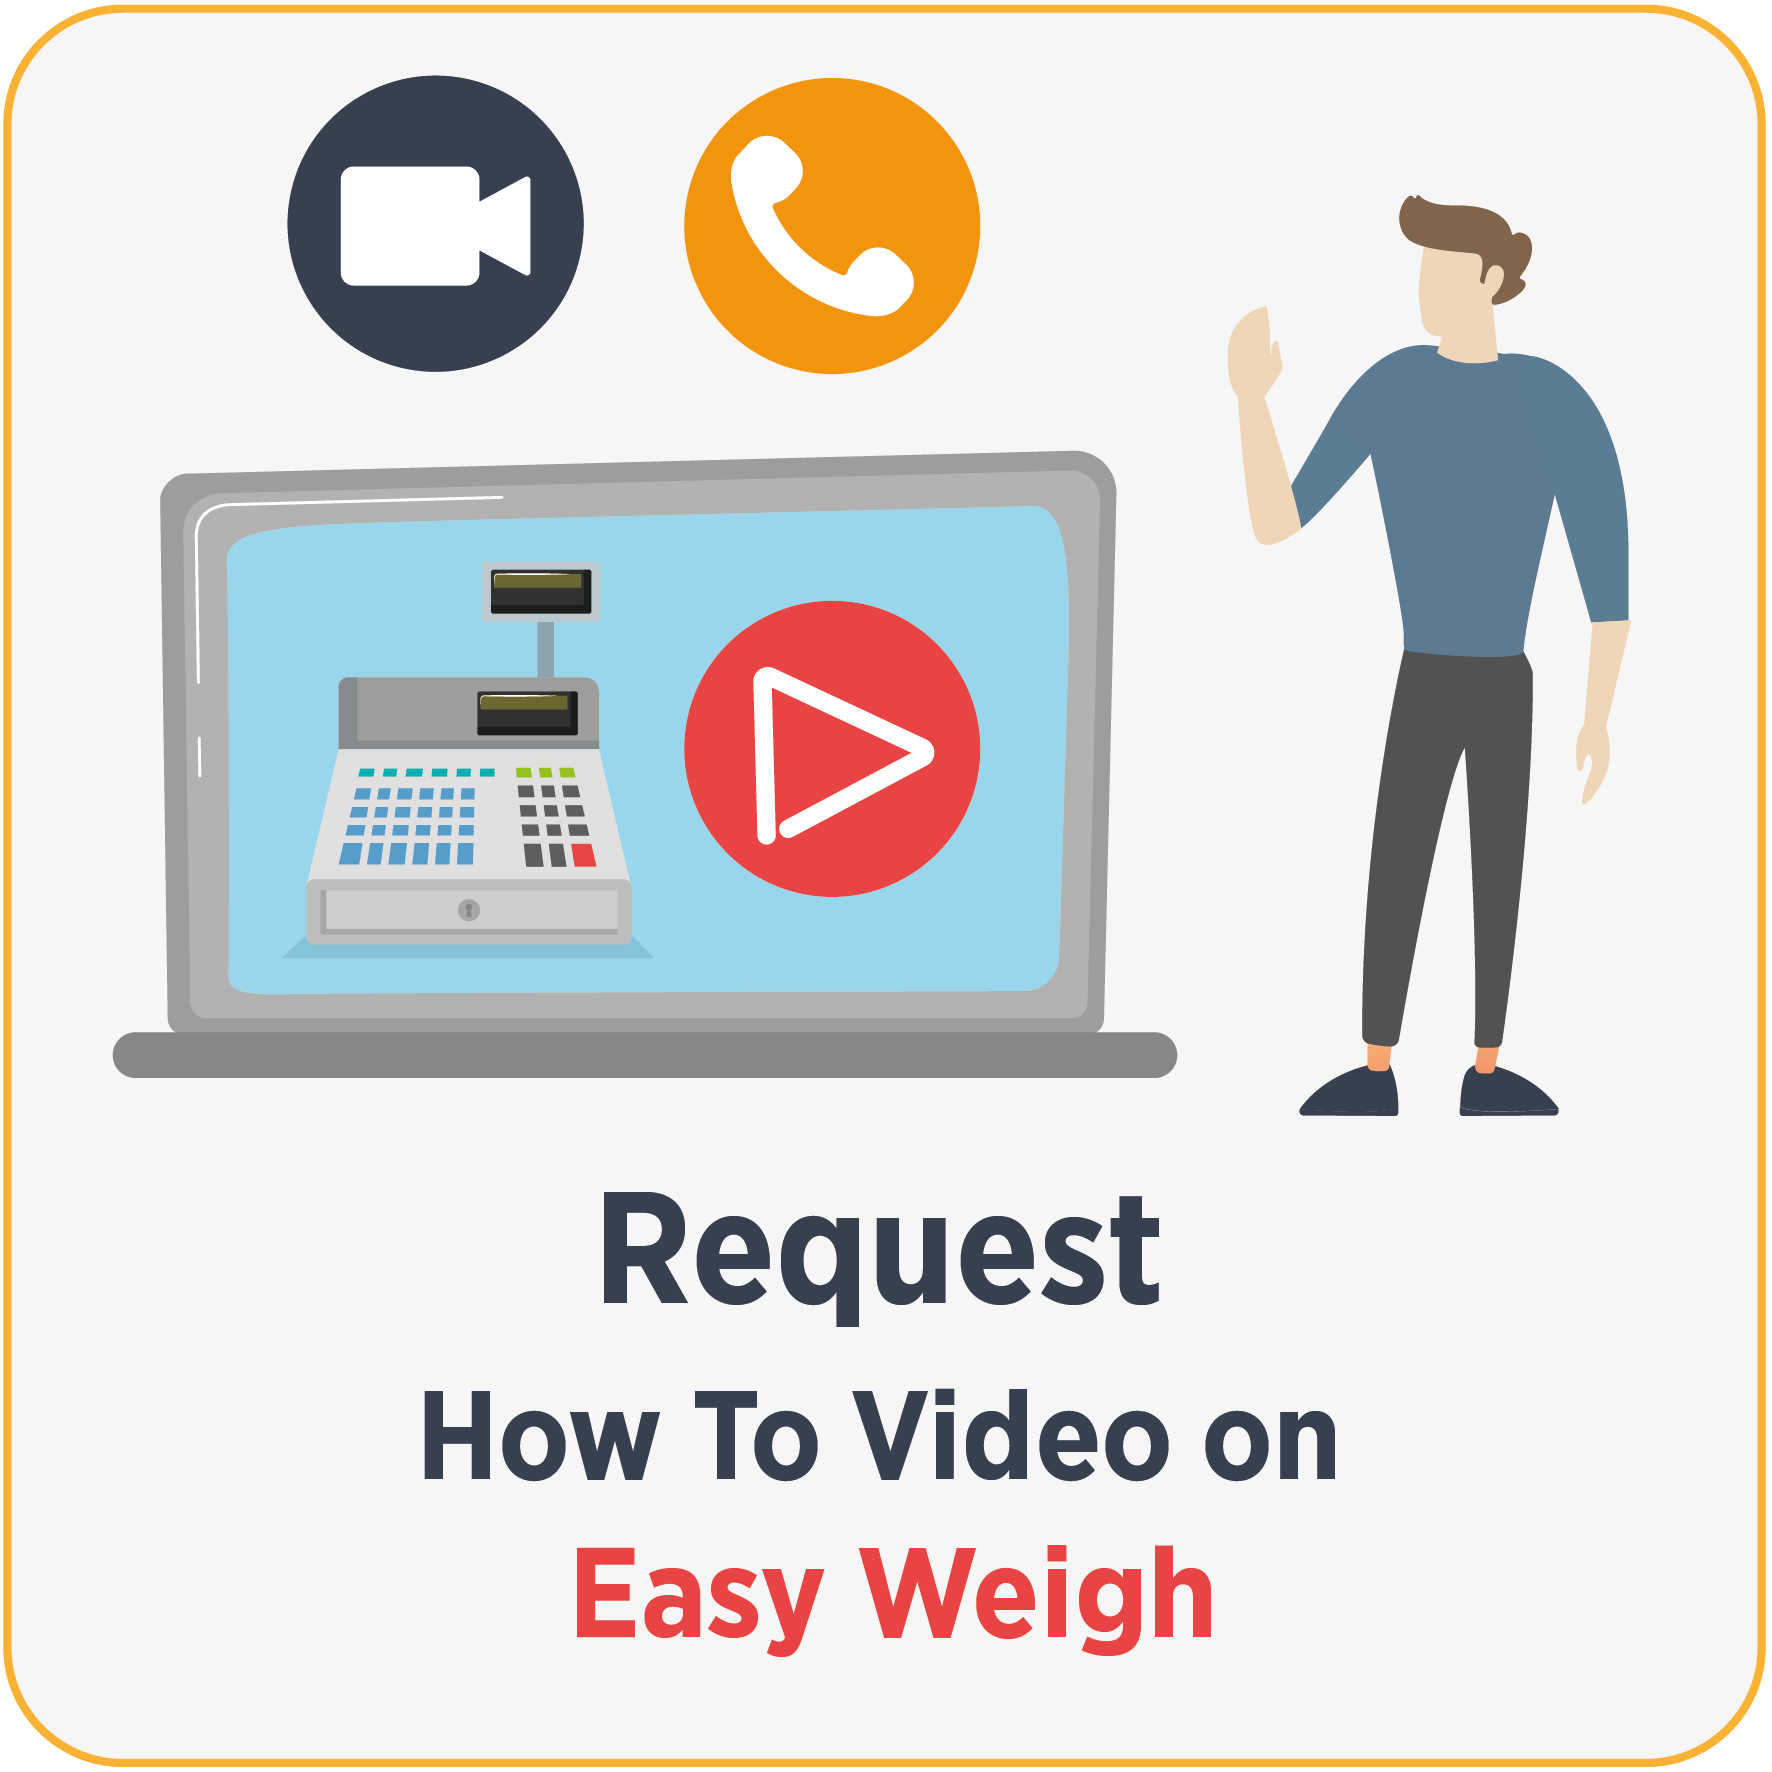 Commission a "How To" Video about subject on Easy Weigh